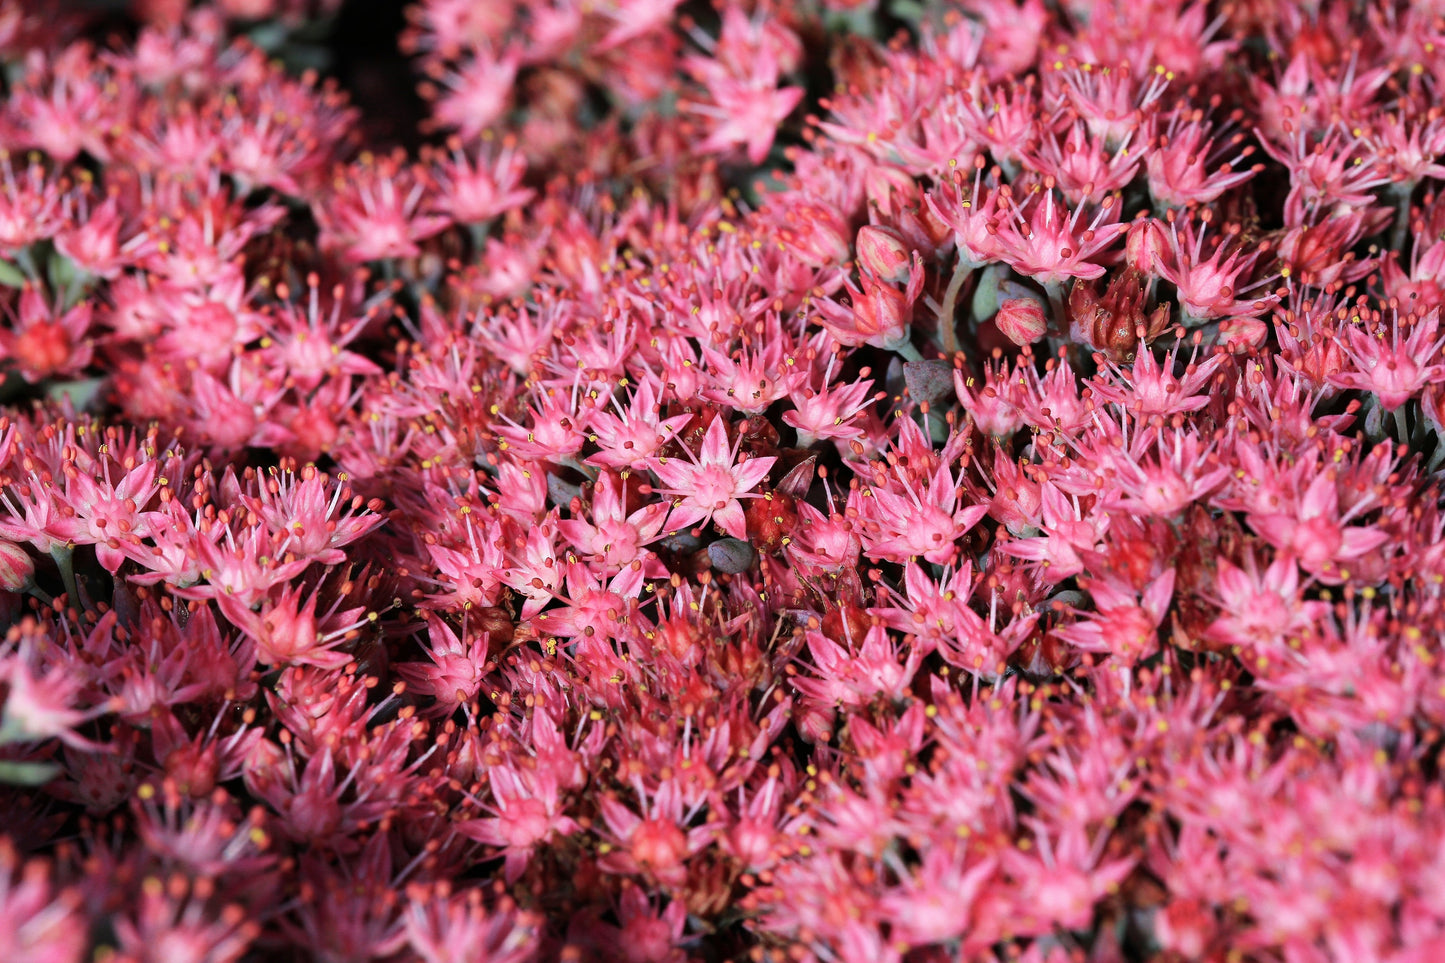 150 MIXED SEDUM Stonecrop Succulent Groundcover Red White Yellow Pink Purple Flower Seeds